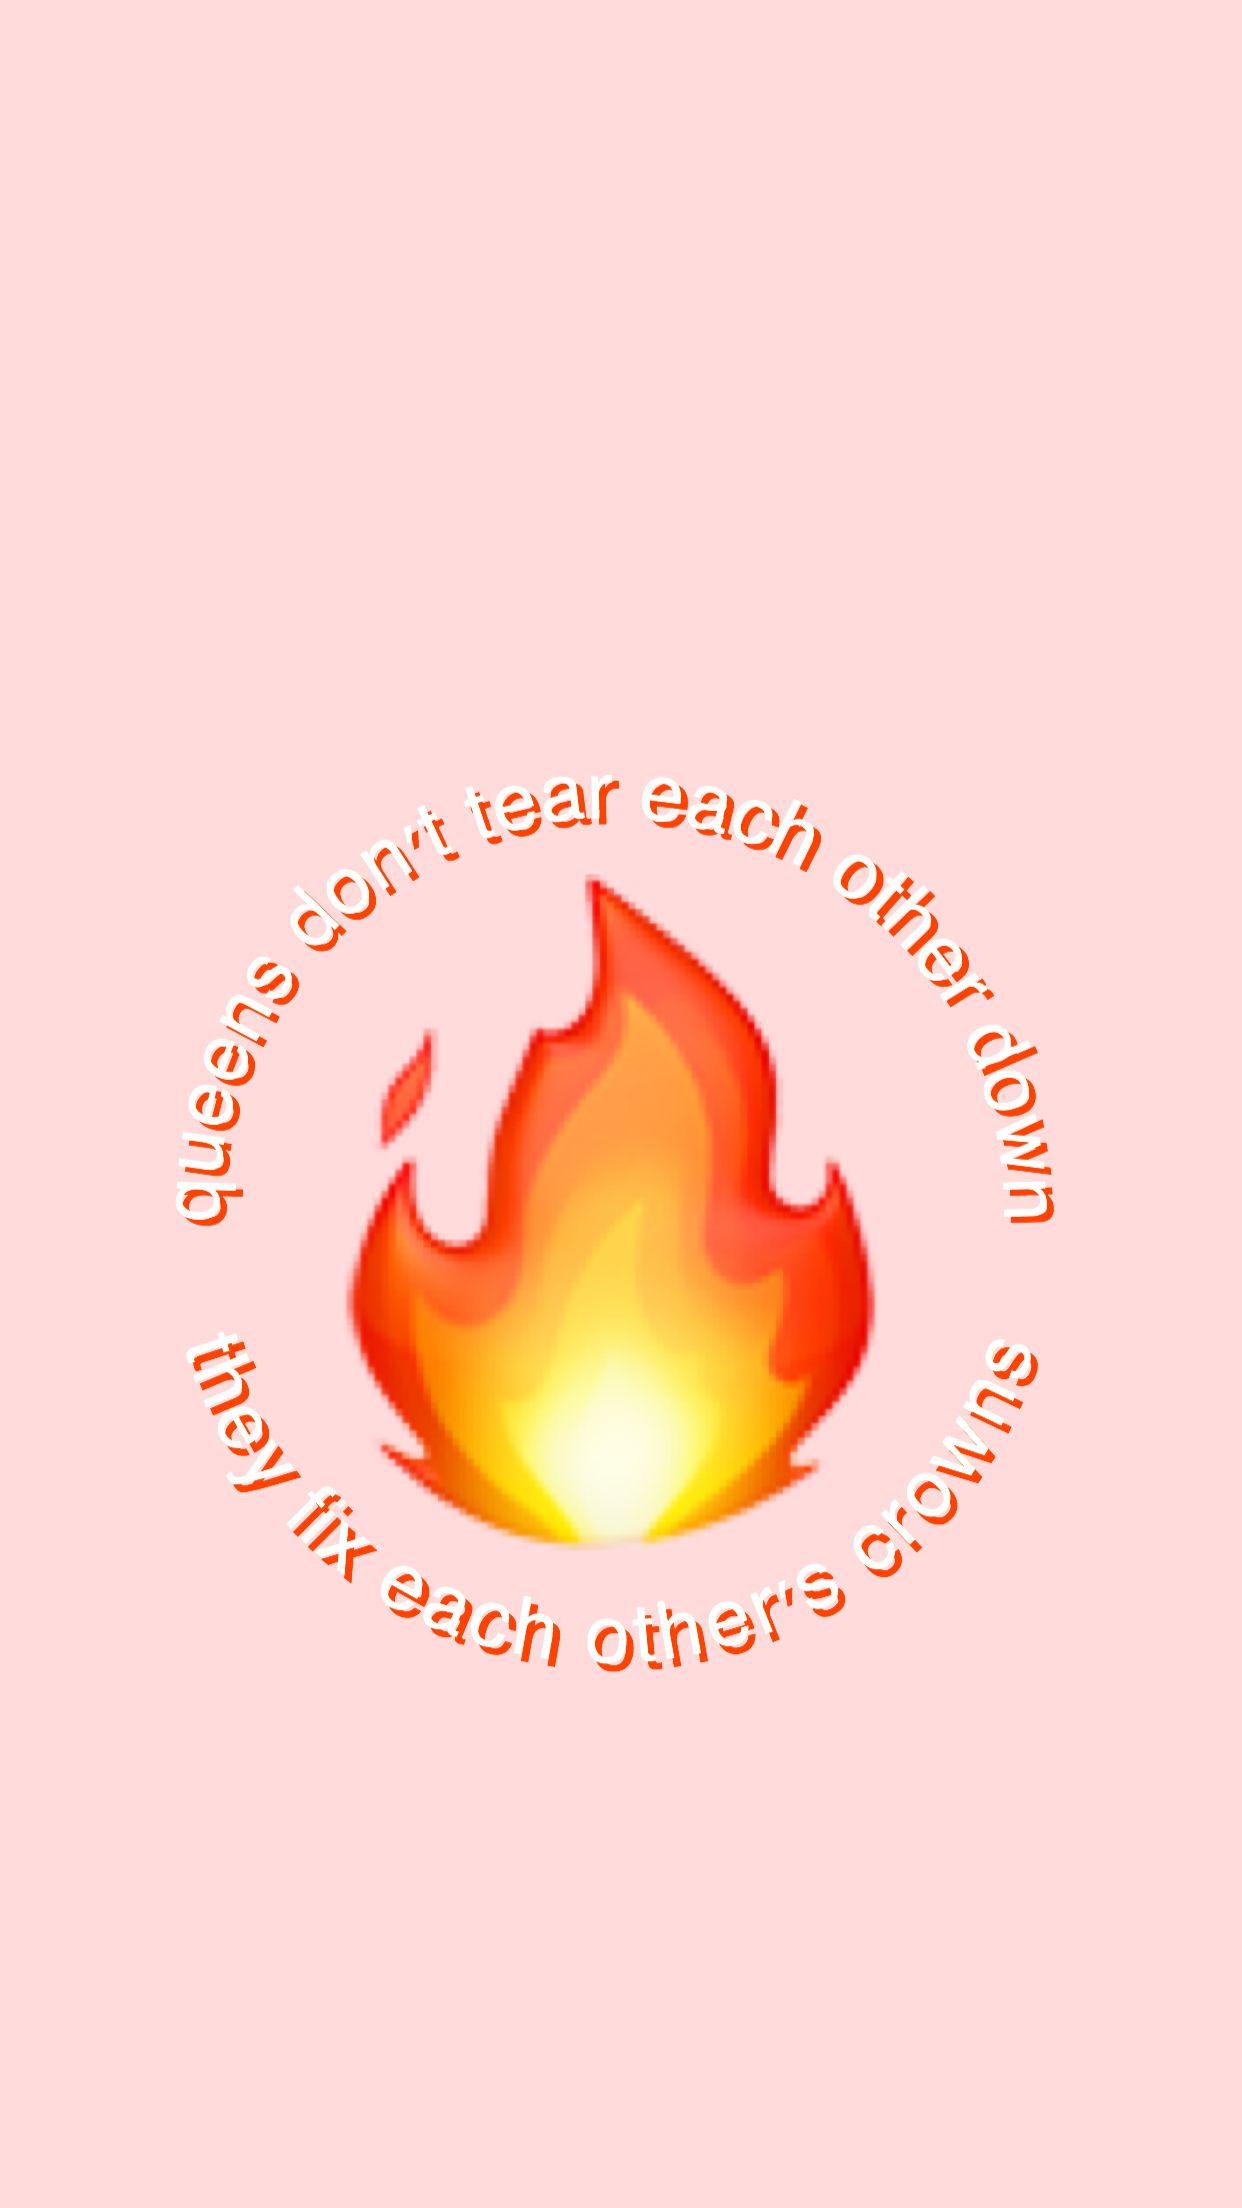 Aesthetic iPhone phone wallpaper background Aesthetic cute fire